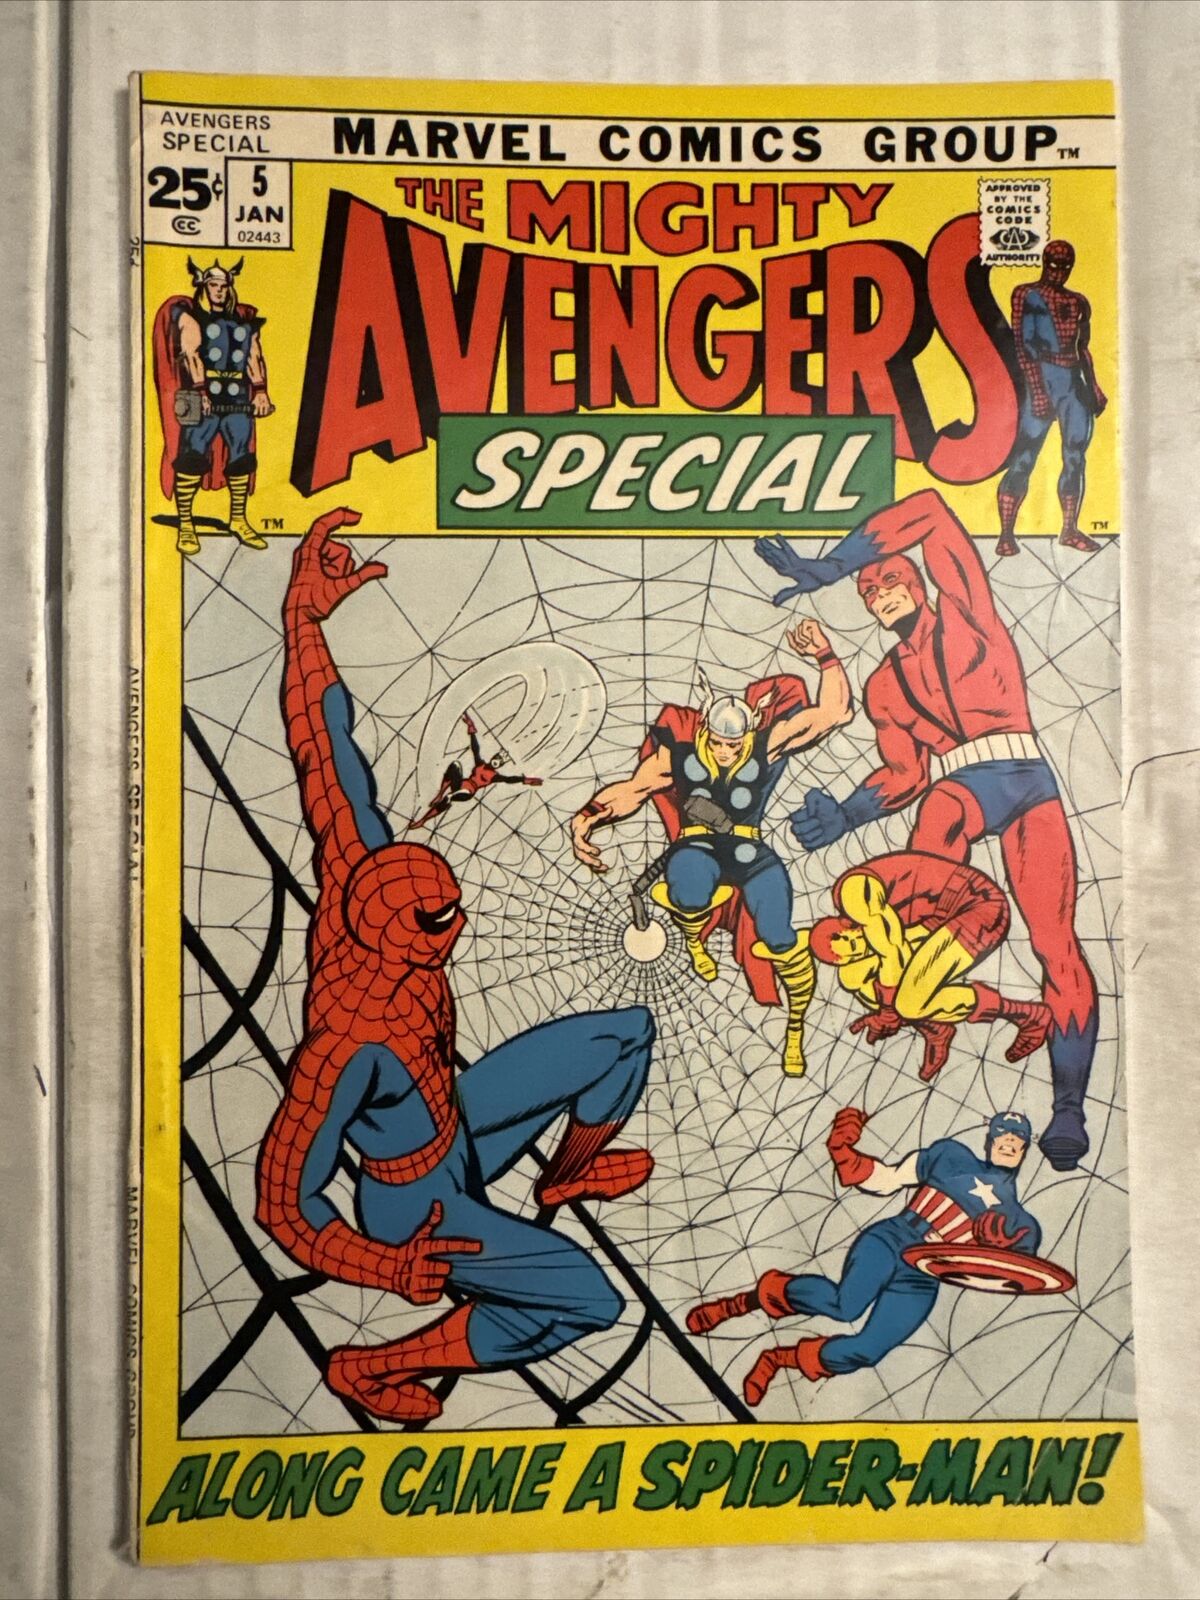 Avengers Annual #5 - Mighty Avengers Special 1st Reprint of 1st App. of Kang